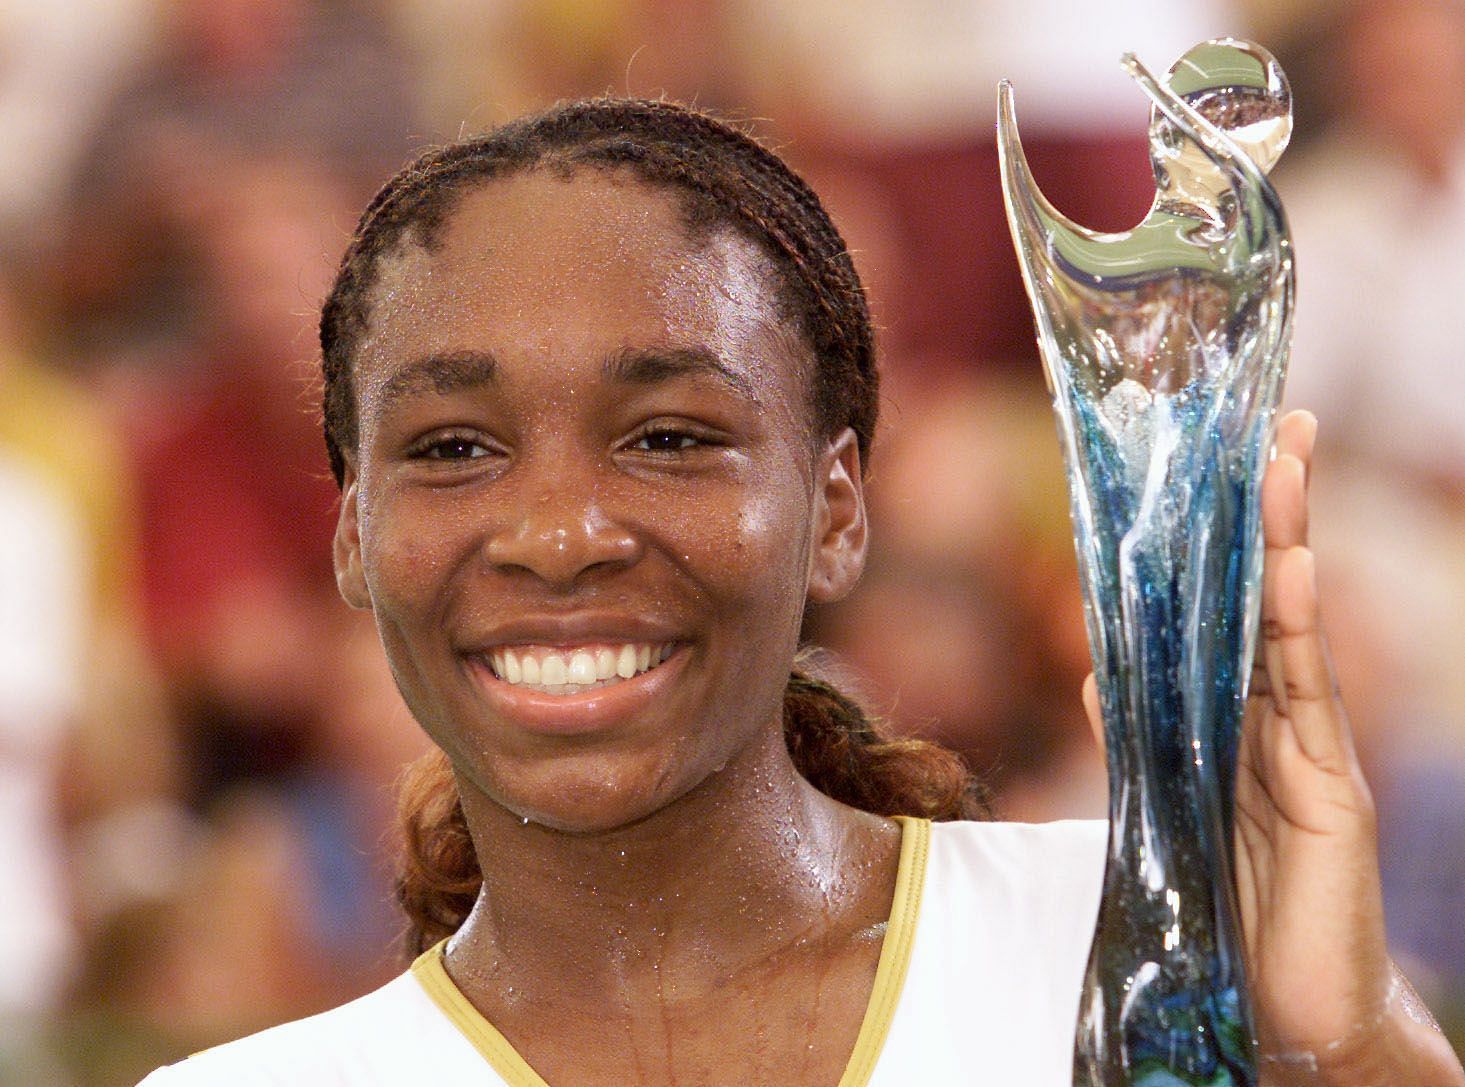 20 years ago on this day, Venus Williams scripted history with her rise to the top of the WTA rankings